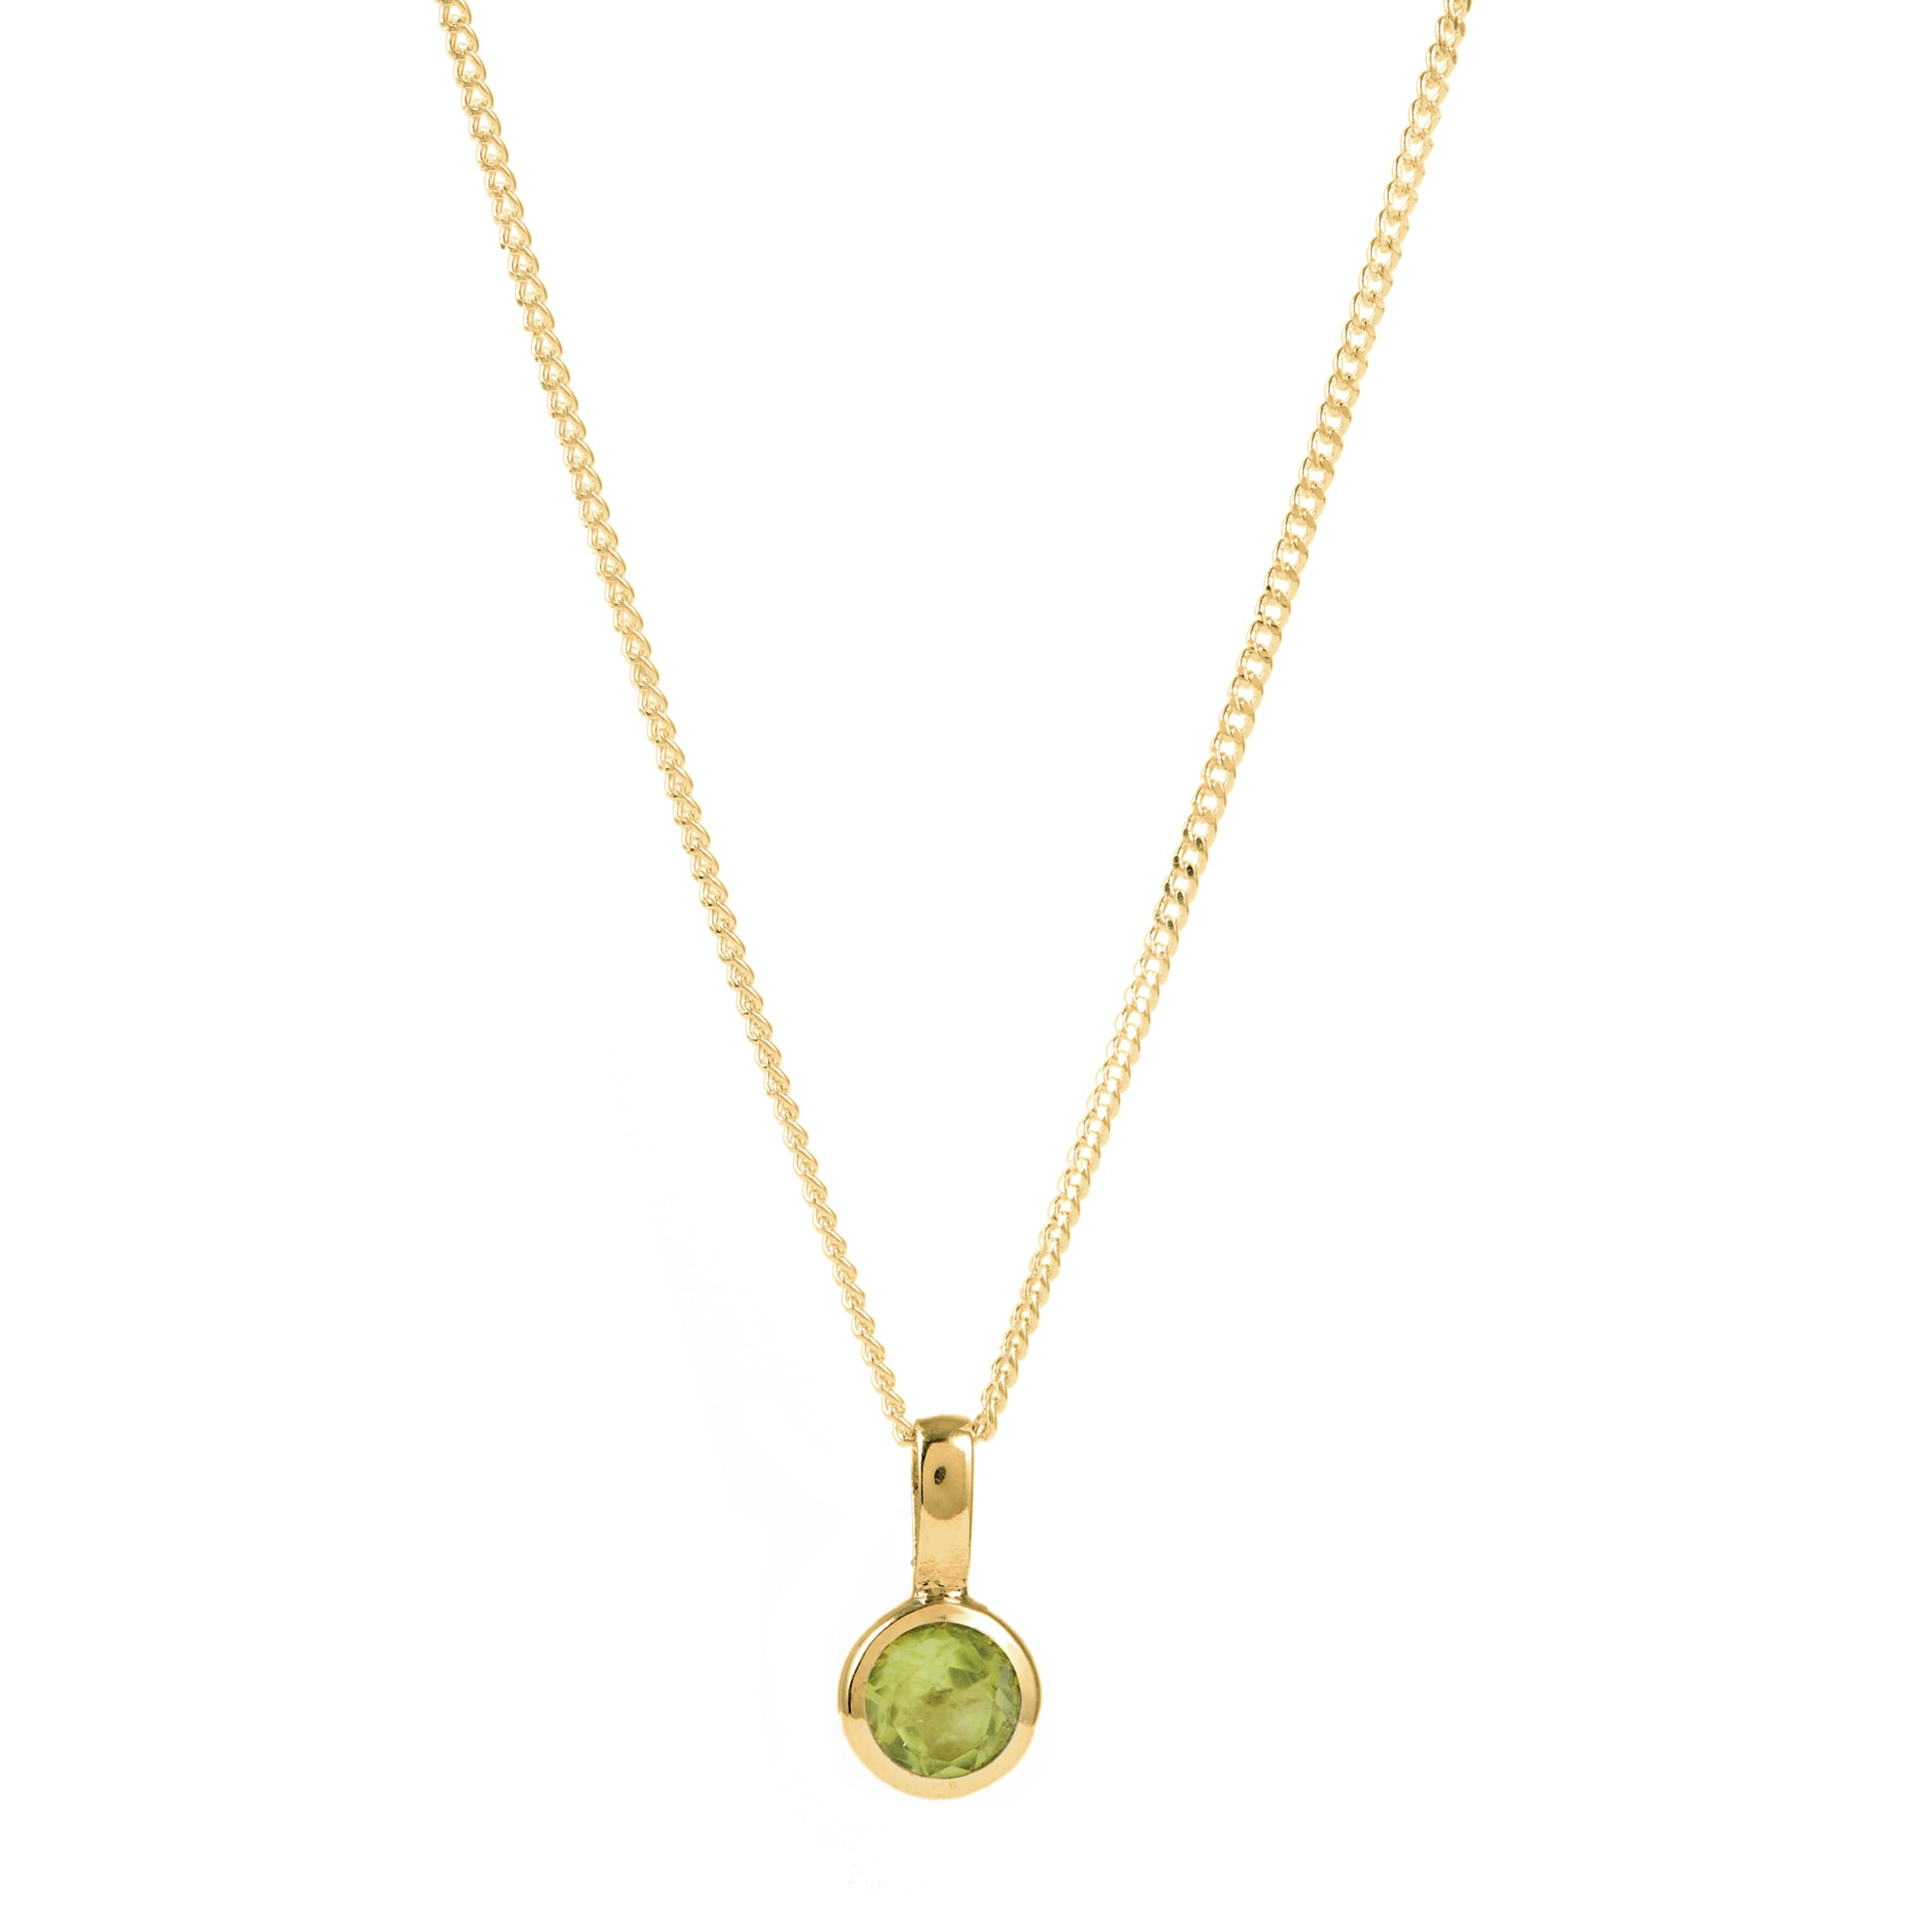 Peridot August Birthstone Charm Necklace